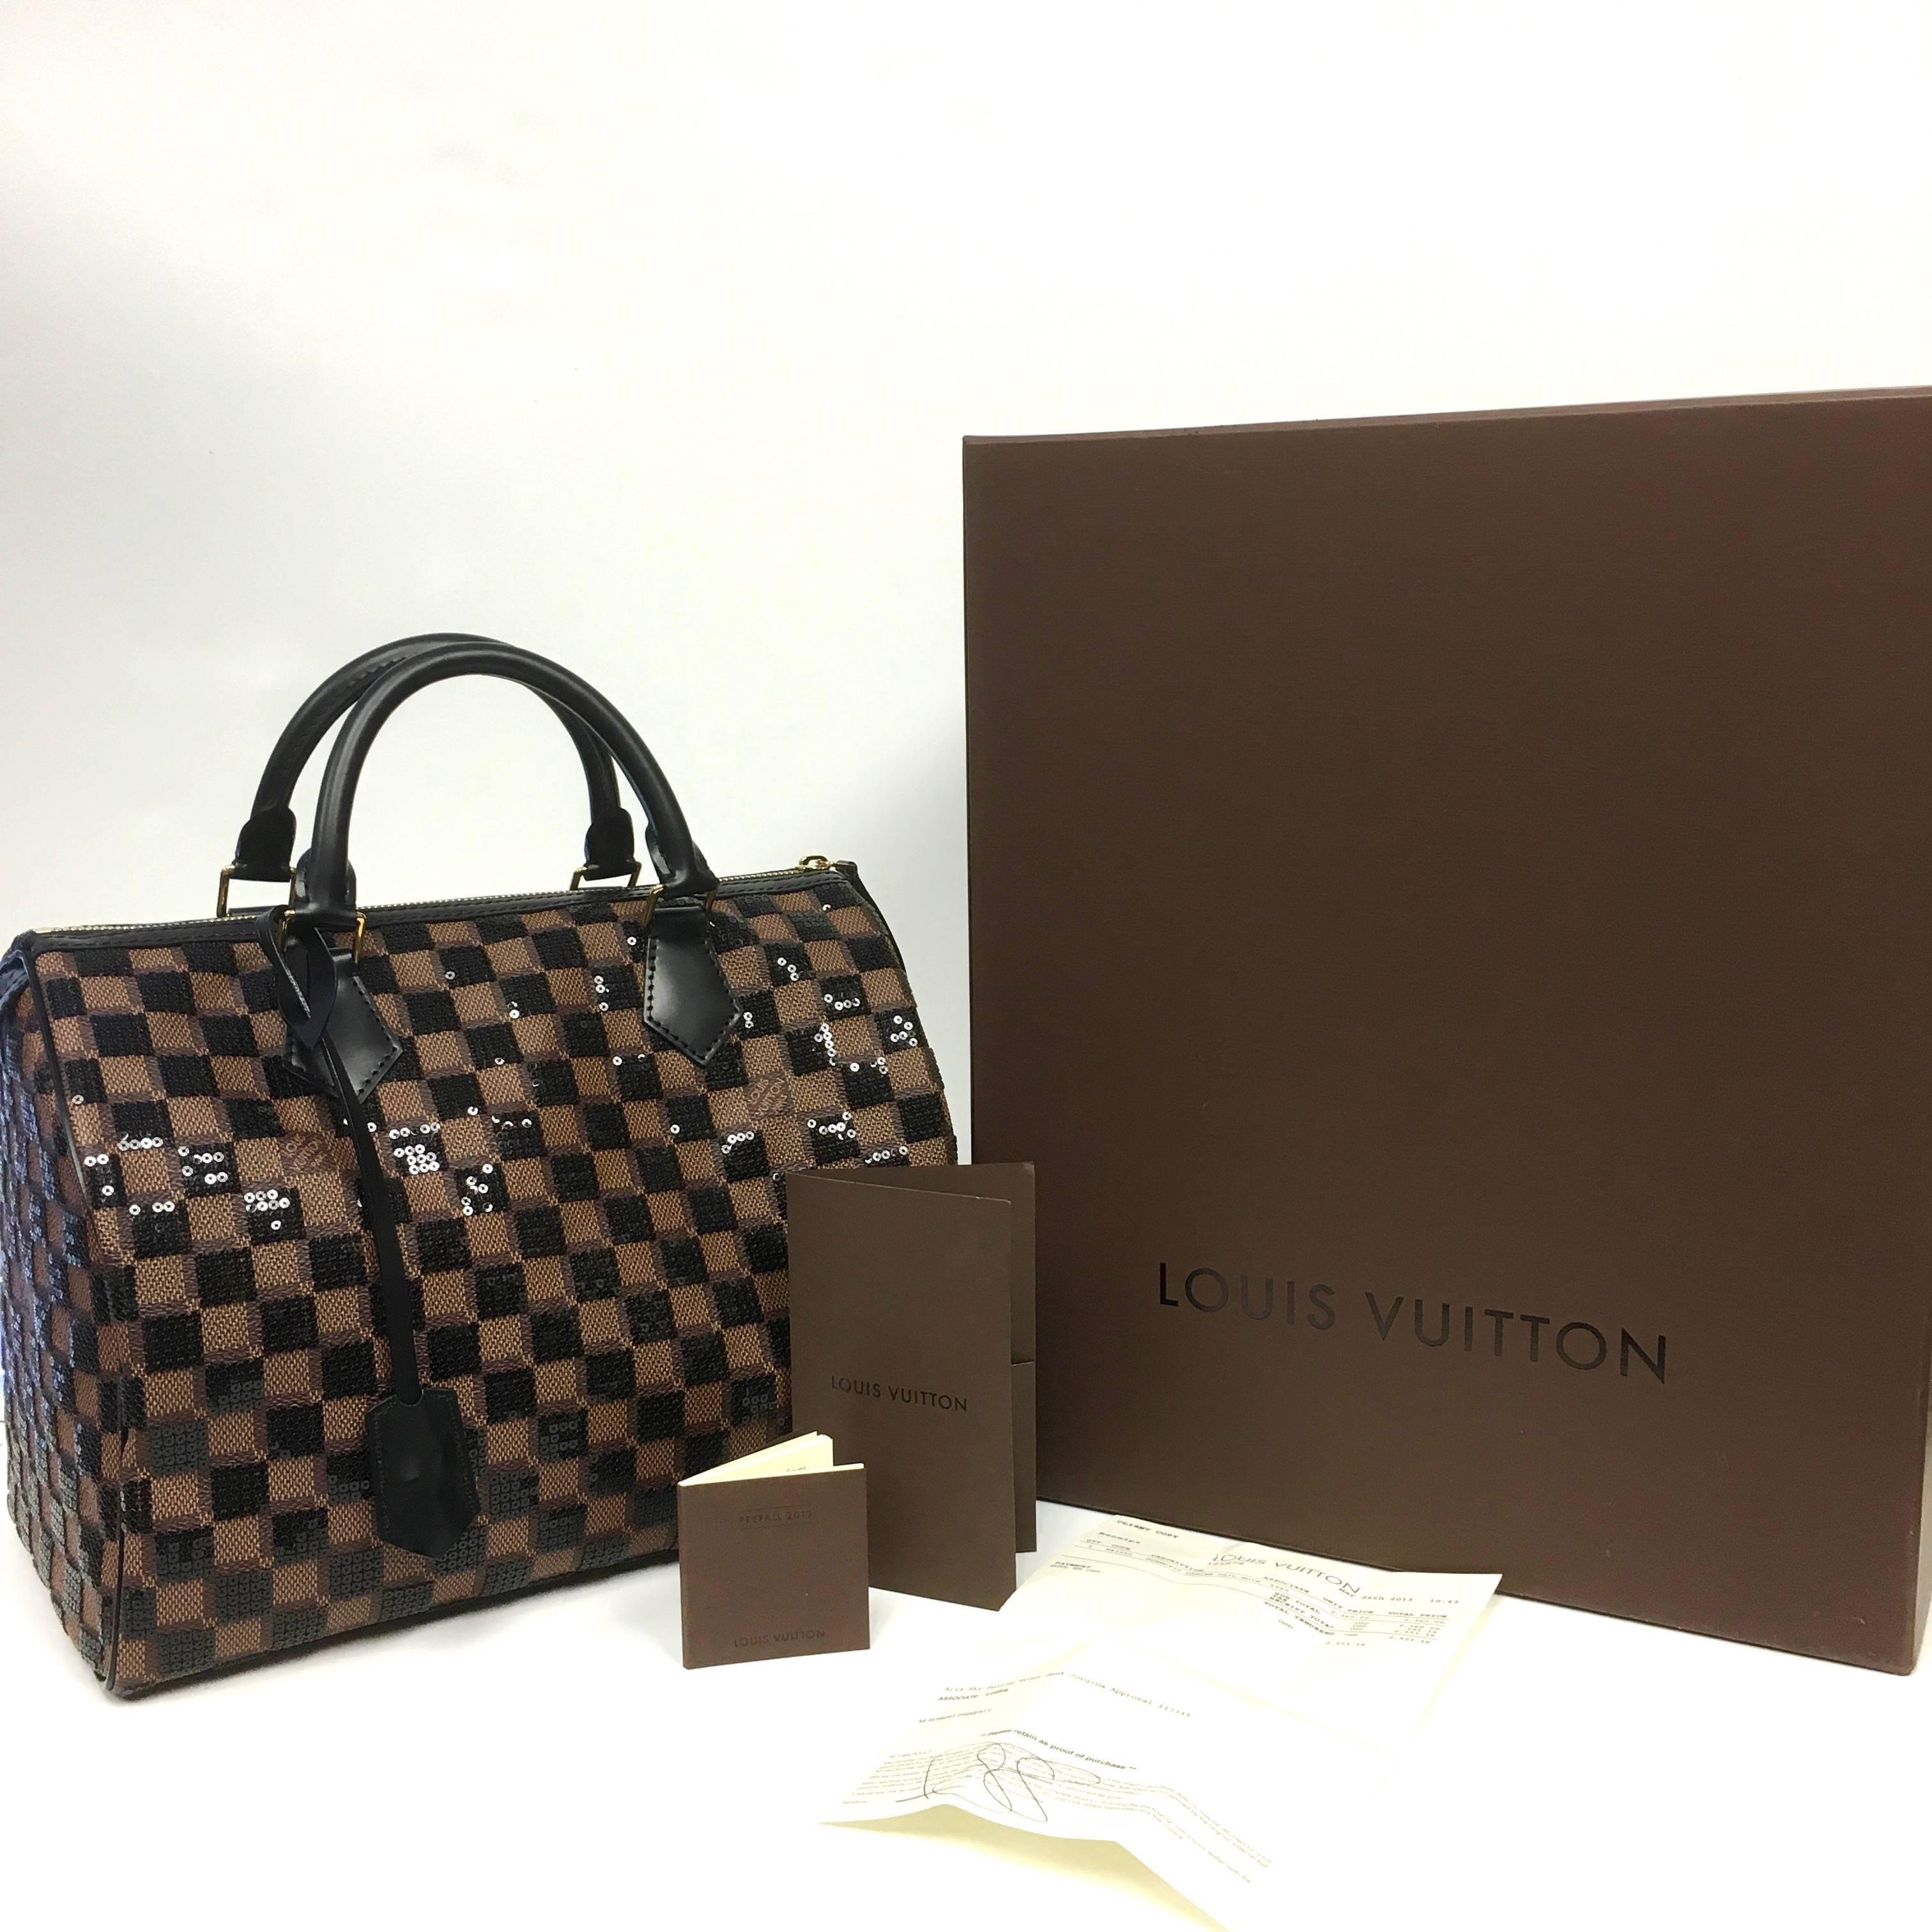 Authentic Louis Vuitton Speedy 30 Damier Paillettes Noir Sequin Purse
Condition: New 

Louis Vuitton Pre-Fall 2013 limited edition sequin speedy bag.
Sophisticated and glamorous must have made for any Louis Vuitton collector. Constructed in